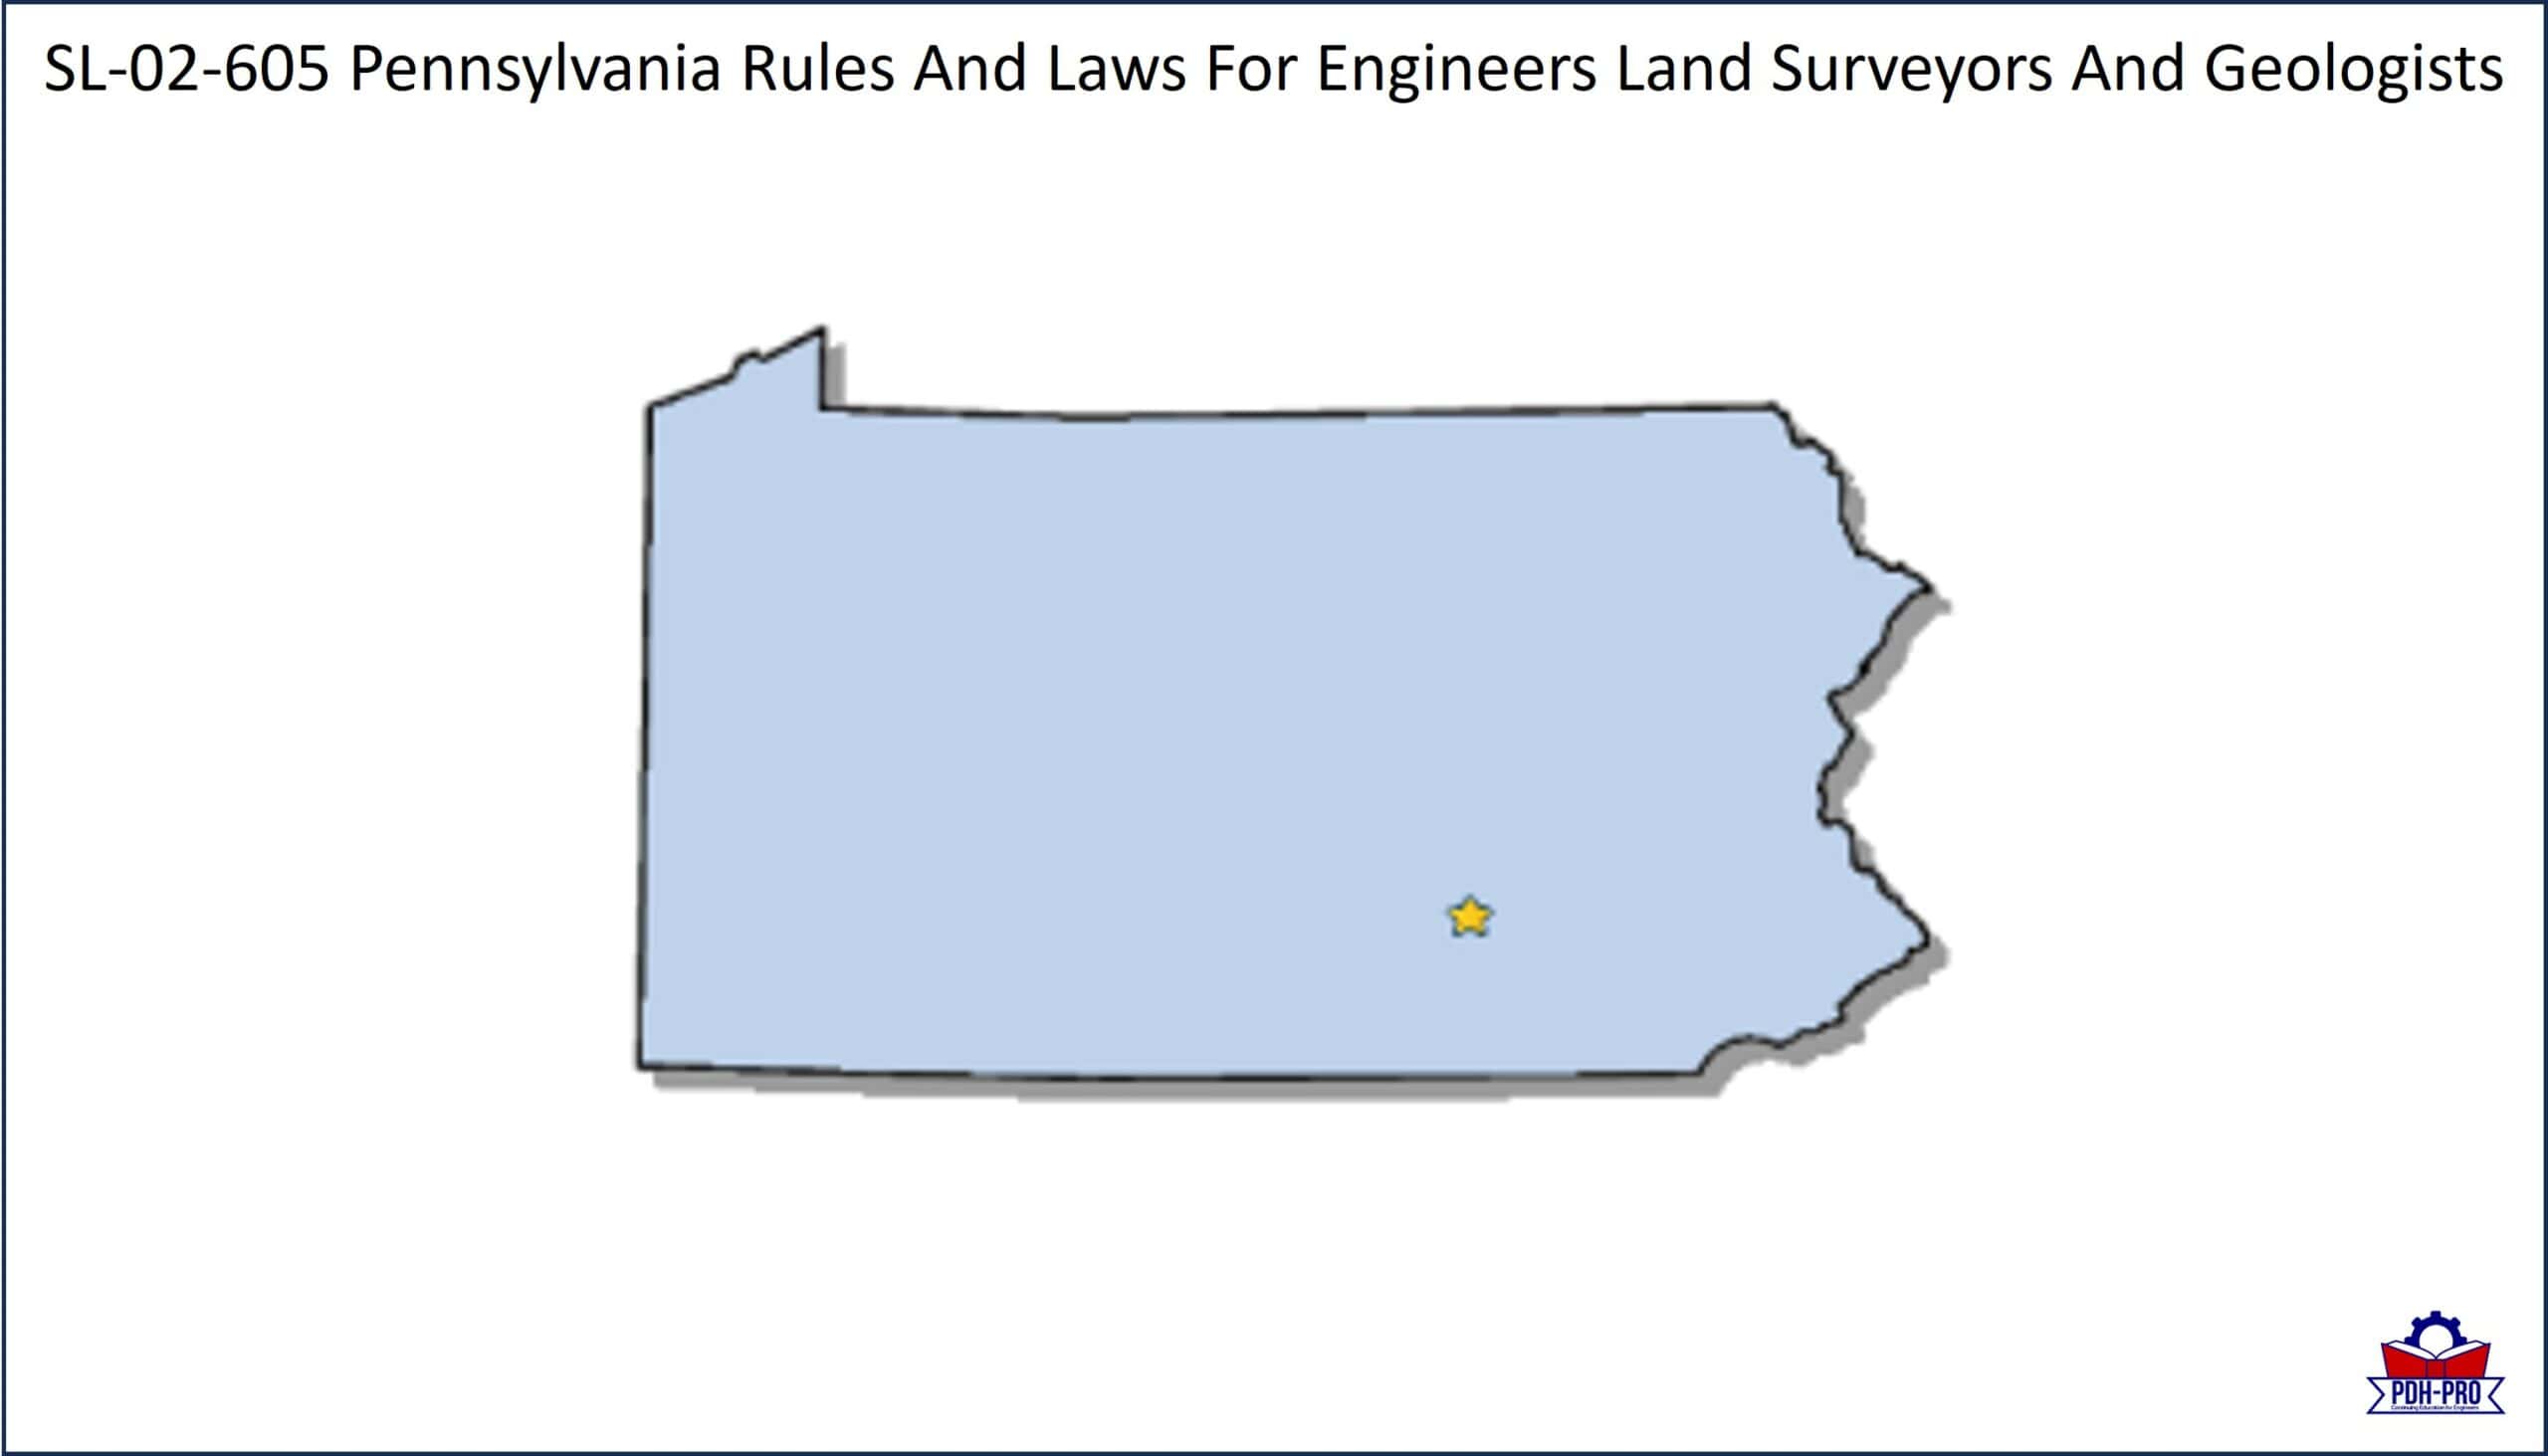 Pennsylvania Rules And Laws For Engineers Land Surveyors And Geologists